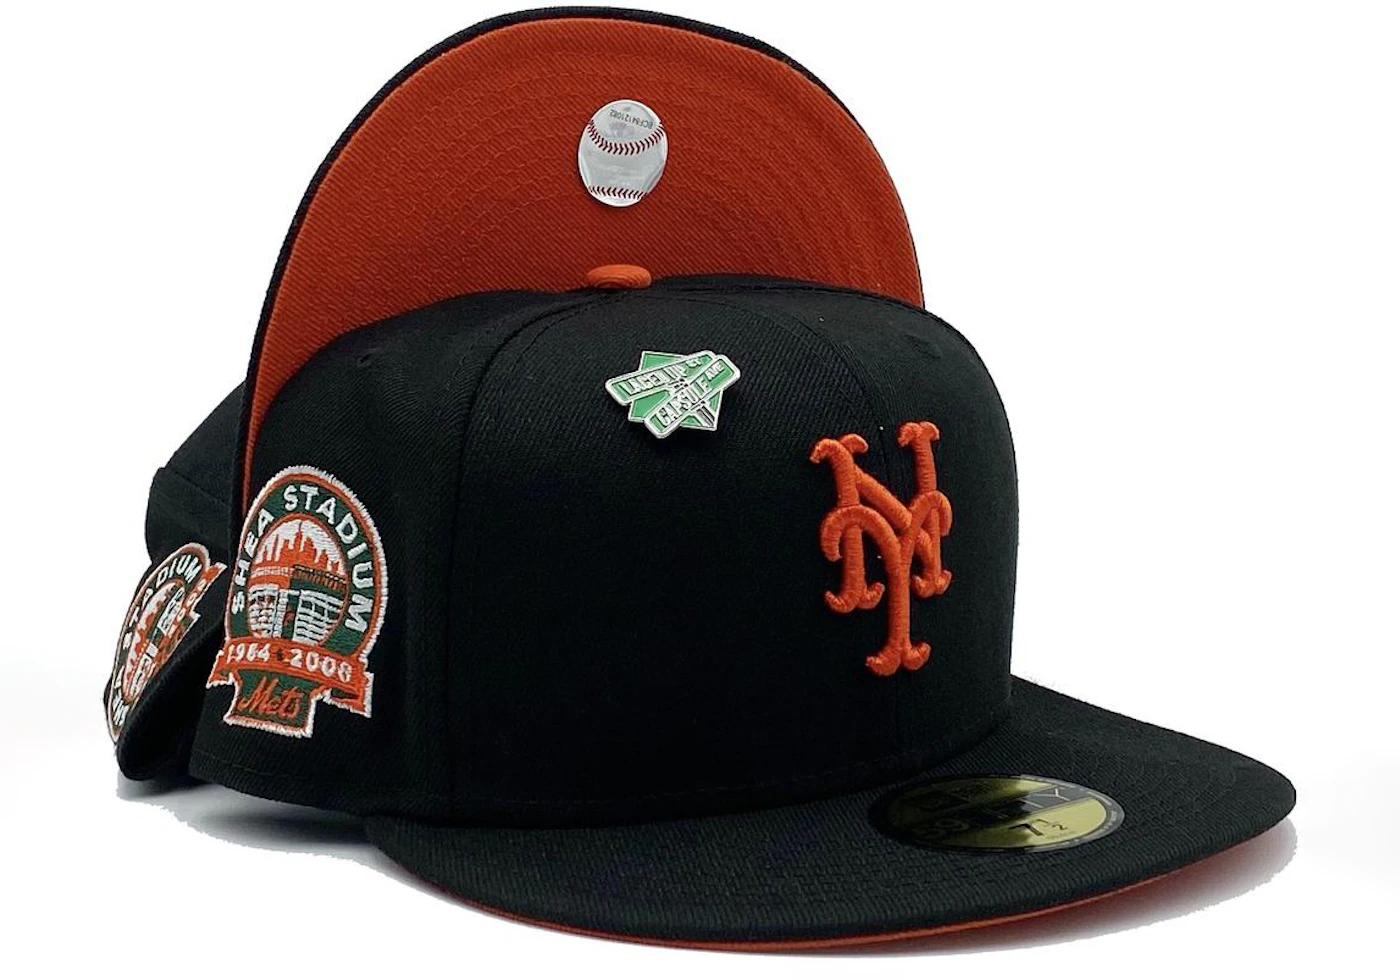 New Era New York Mets Crossroads Collection (Queens) Shea Stadium Capsule  Hats Exclusive 59Fifty Fitted Hat Black/Orange Men's - SS21 - US